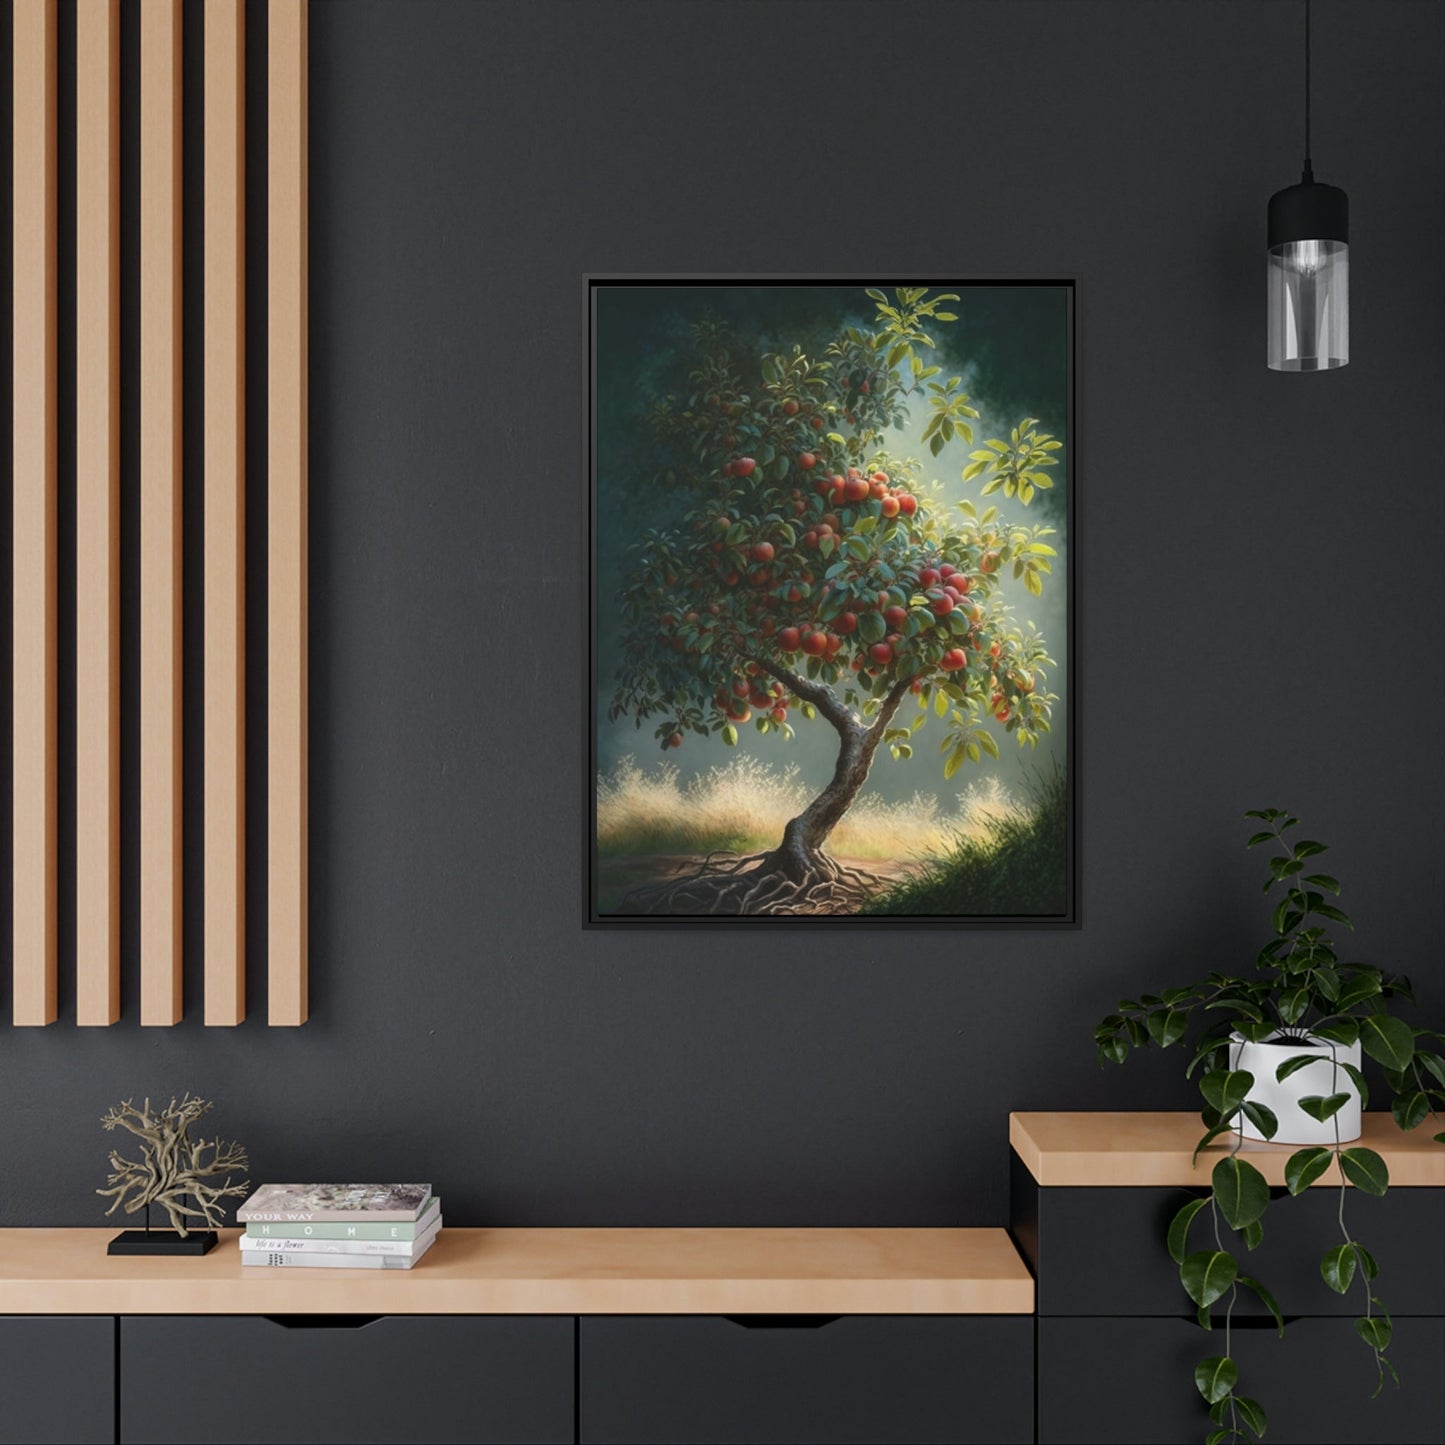 Apple Trees in the Meadow: Canvas Wall Art Print on Canvas of Rural Scenery